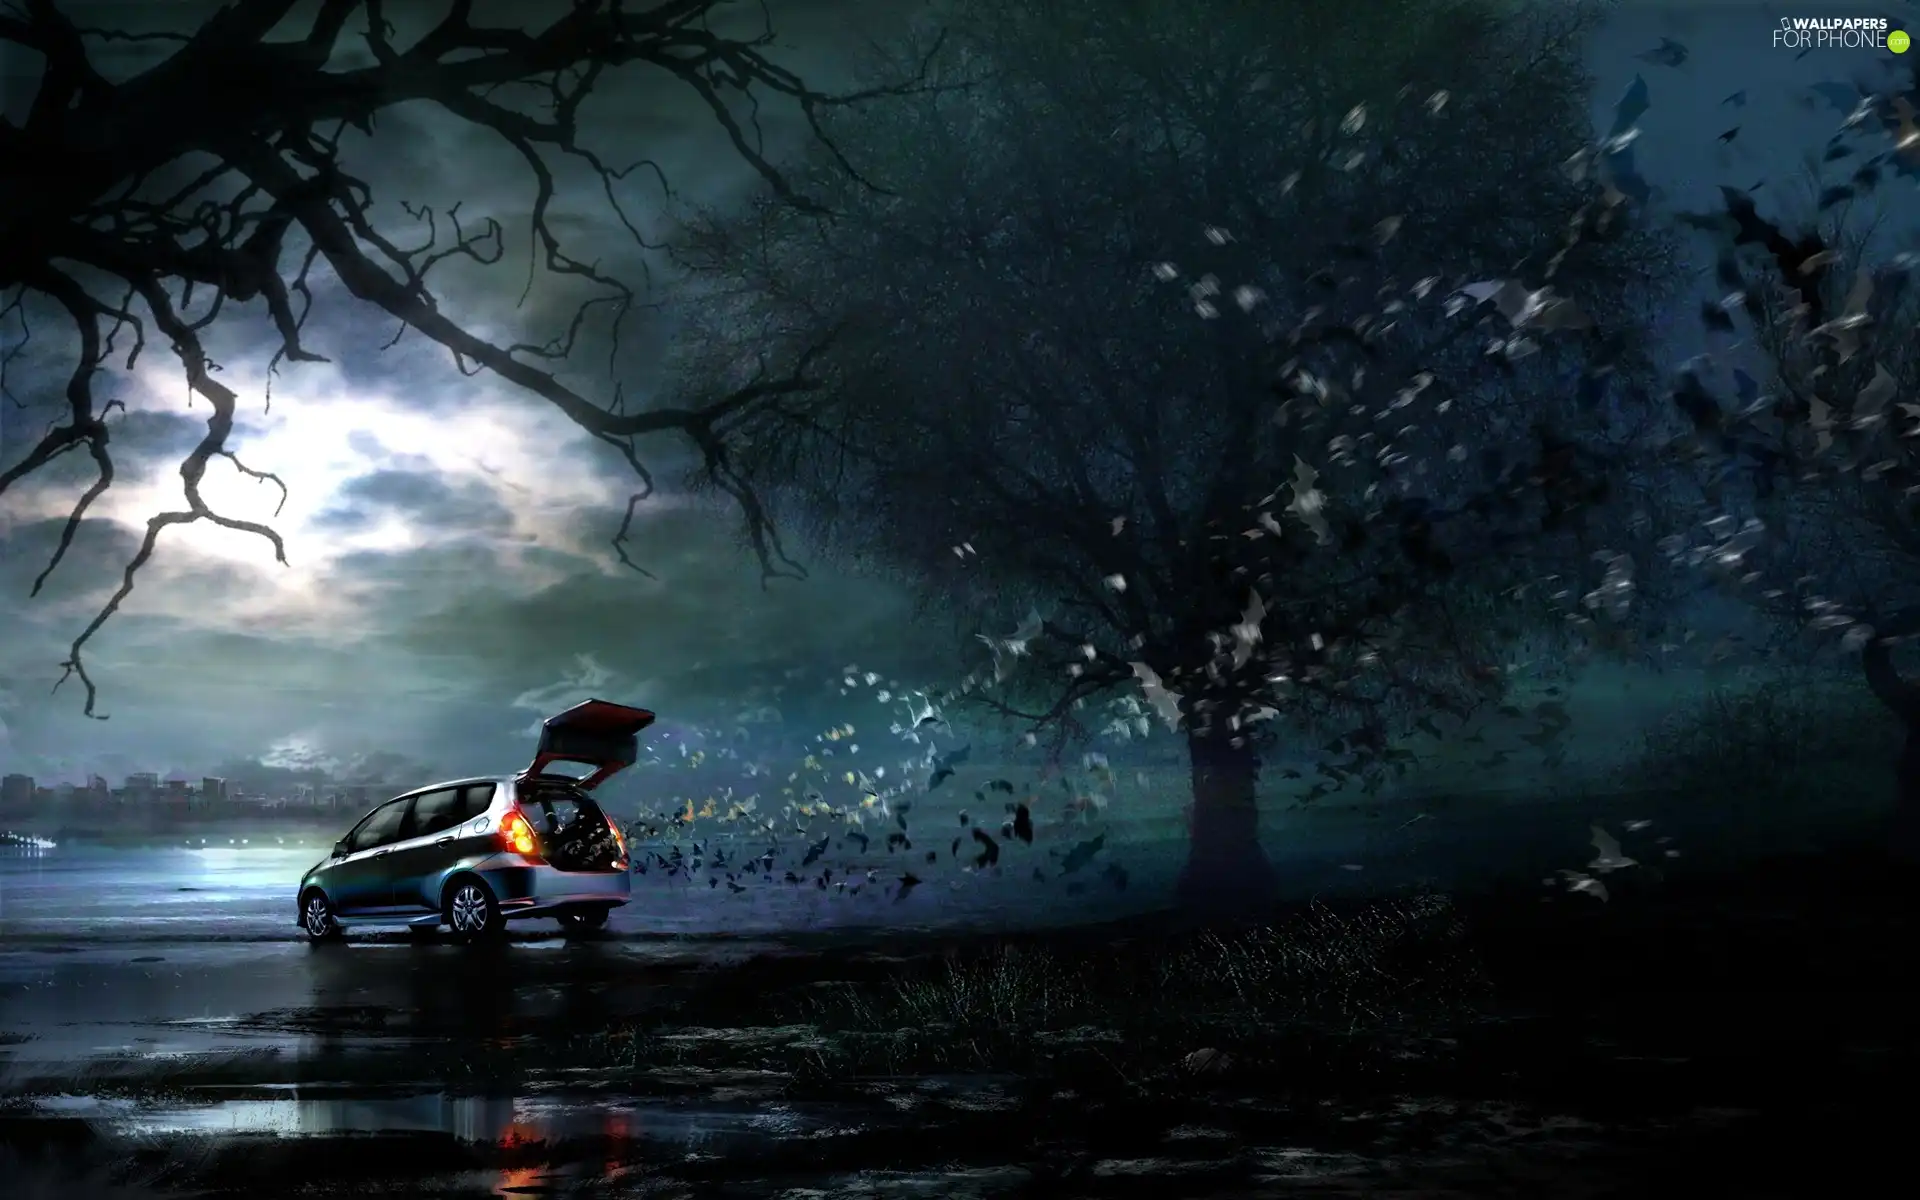 trees, Automobile, water, Sky, viewes, bats